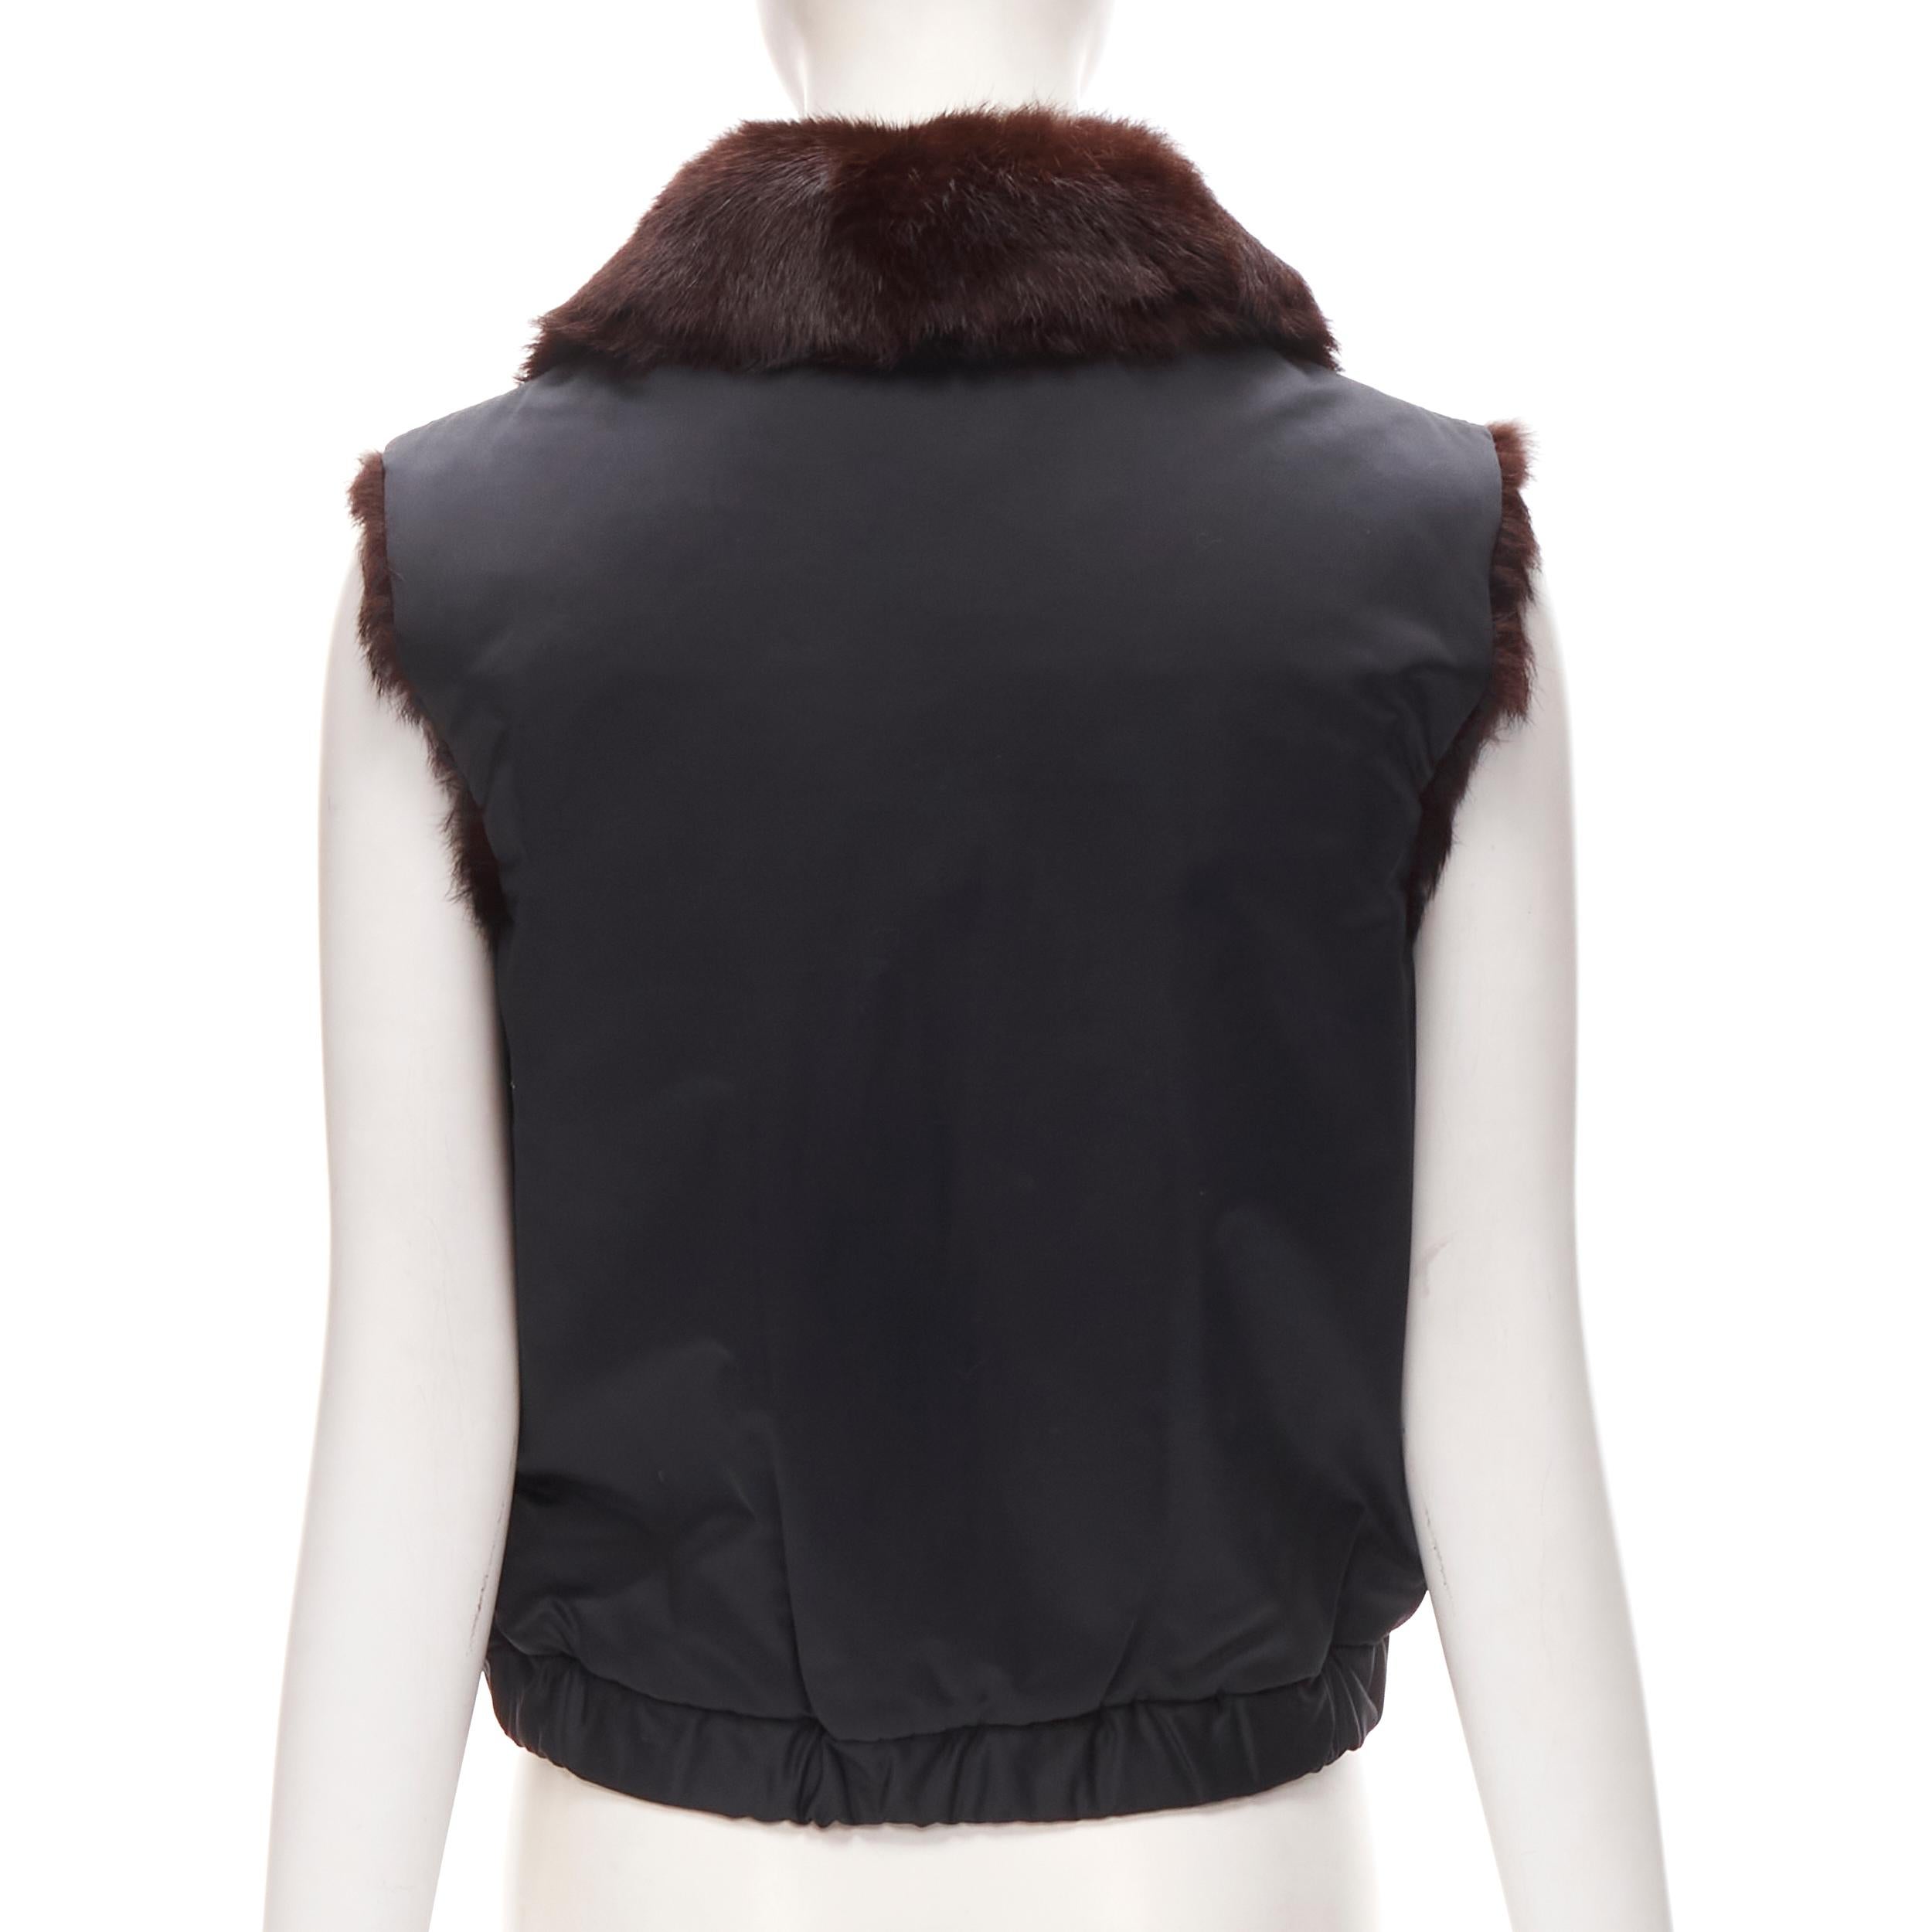 Y3 YOHJI YAMAMOTO ADIDAS black nylon brown genuine fur reversible vest jacket S In Excellent Condition For Sale In Hong Kong, NT